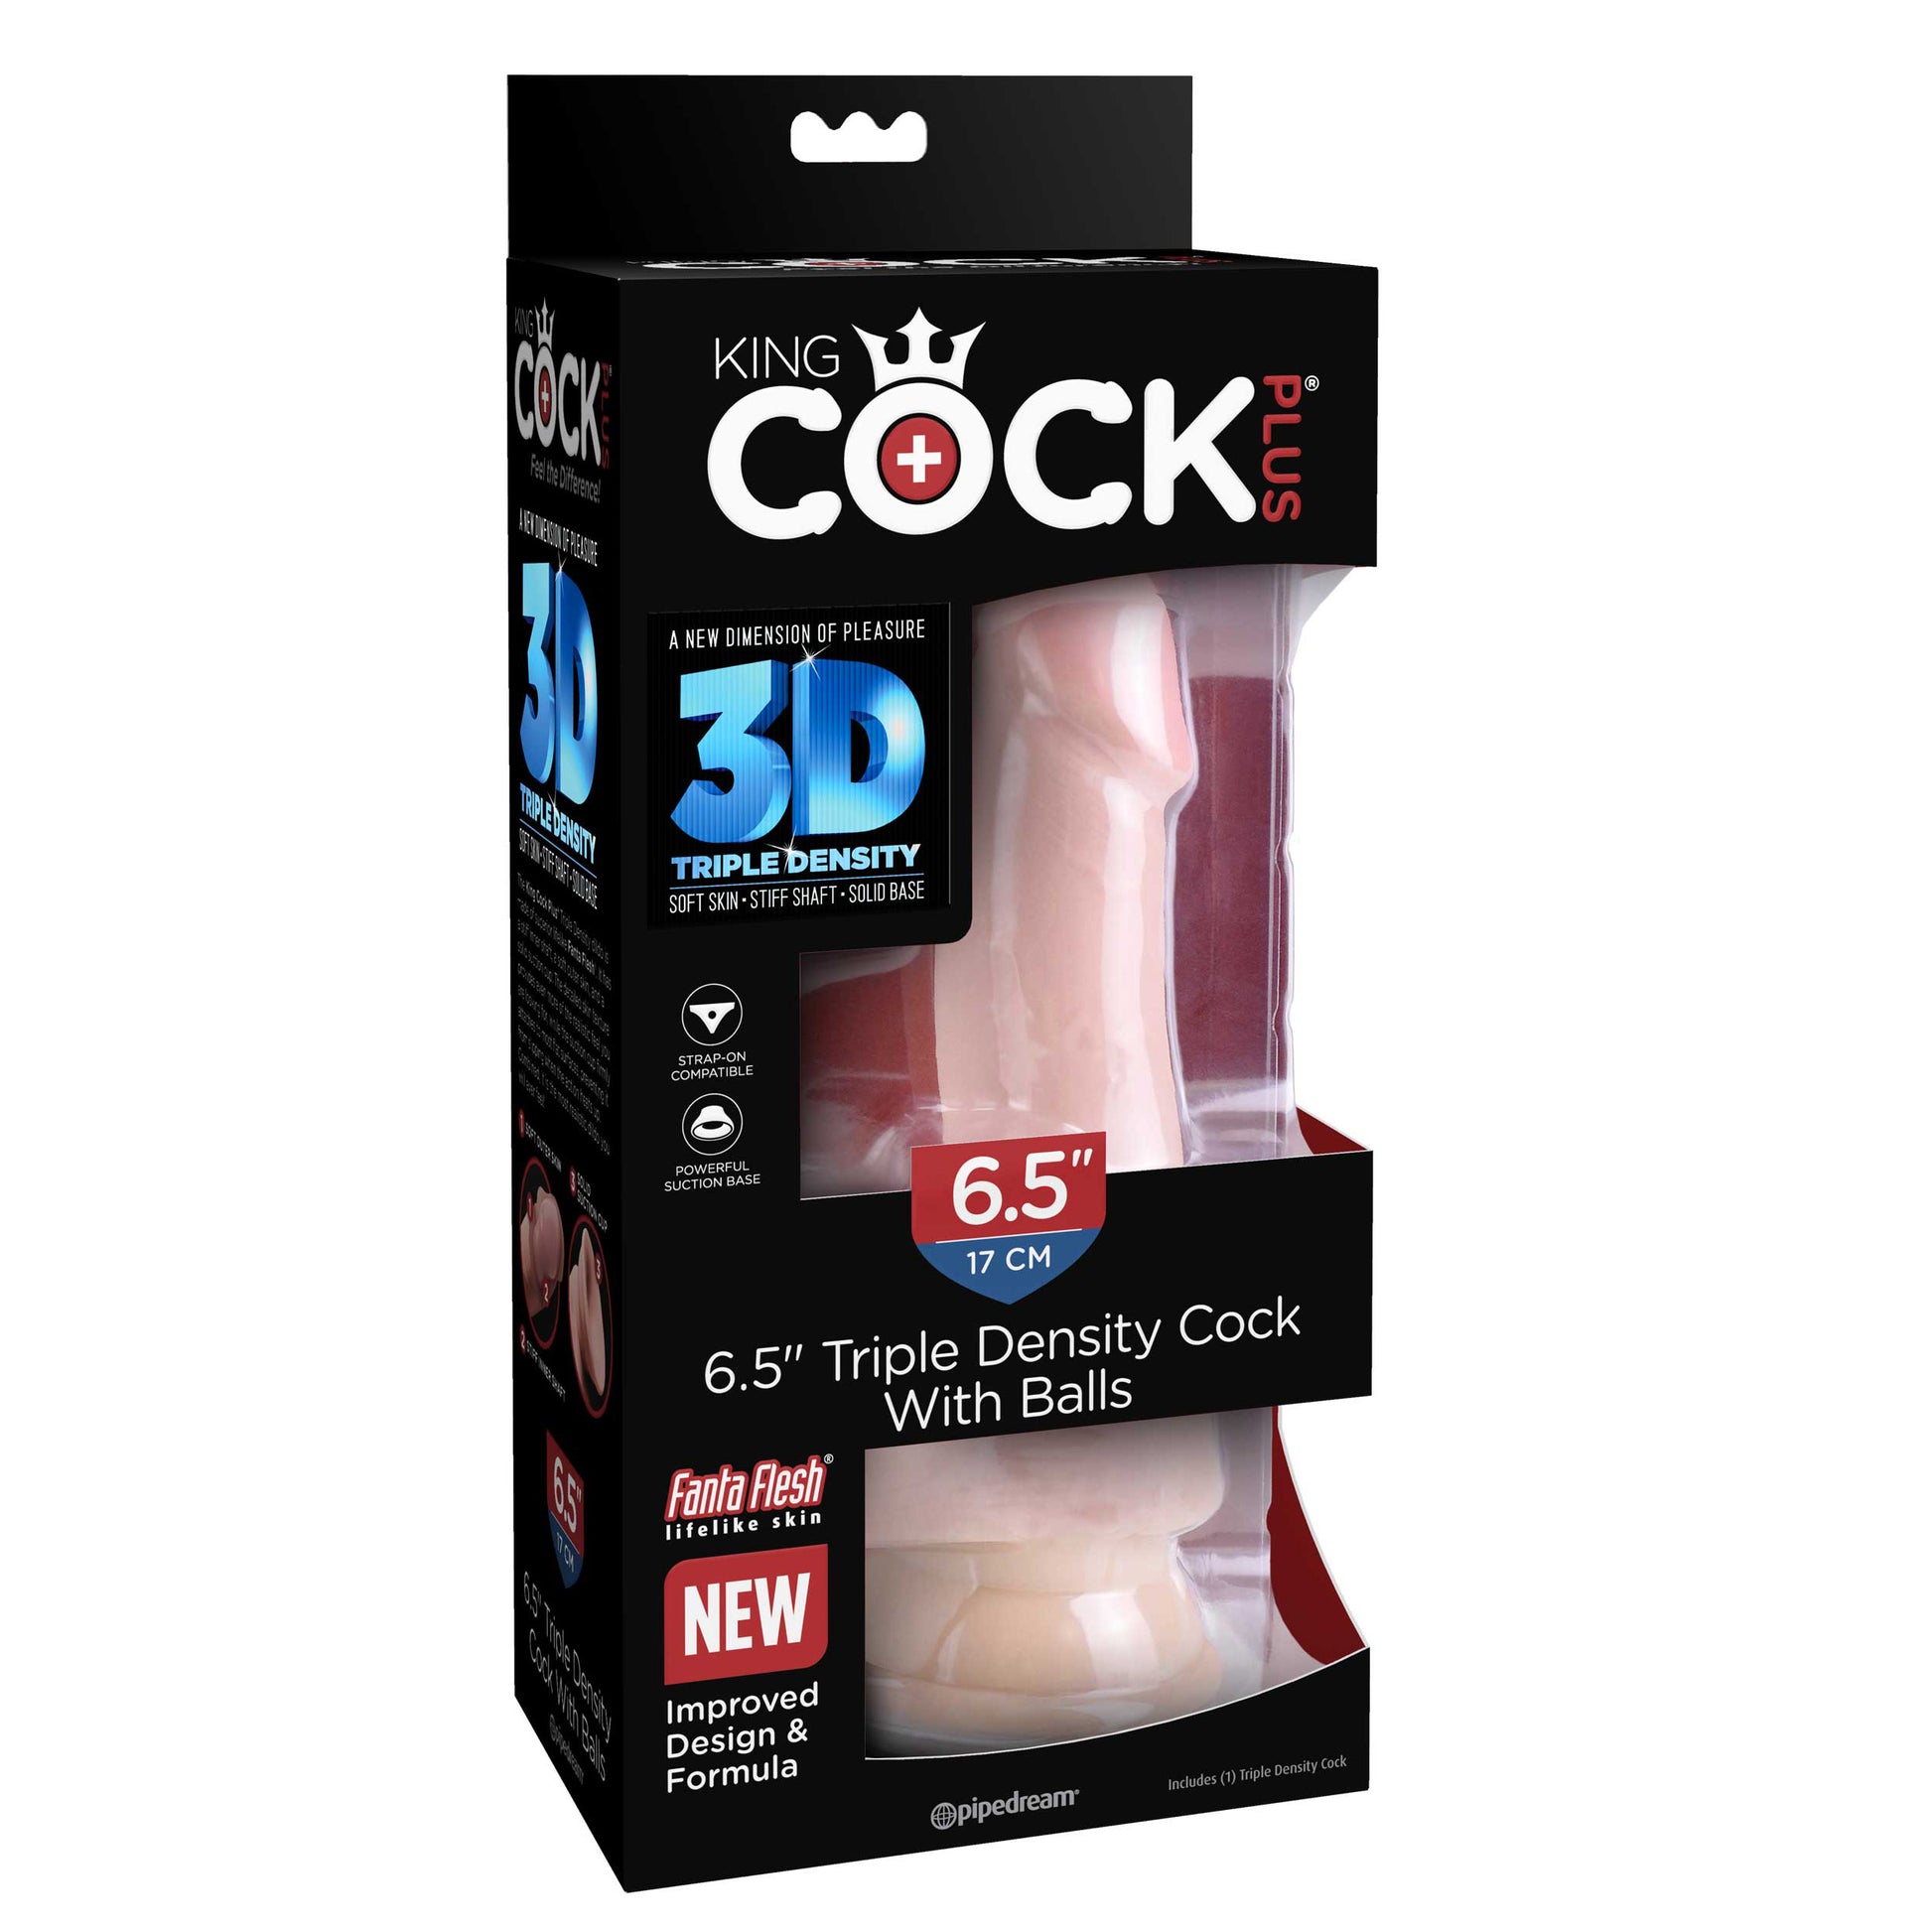 King Cock Plus 6.5" Triple Density Cock with Balls - Light - Thorn & Feather